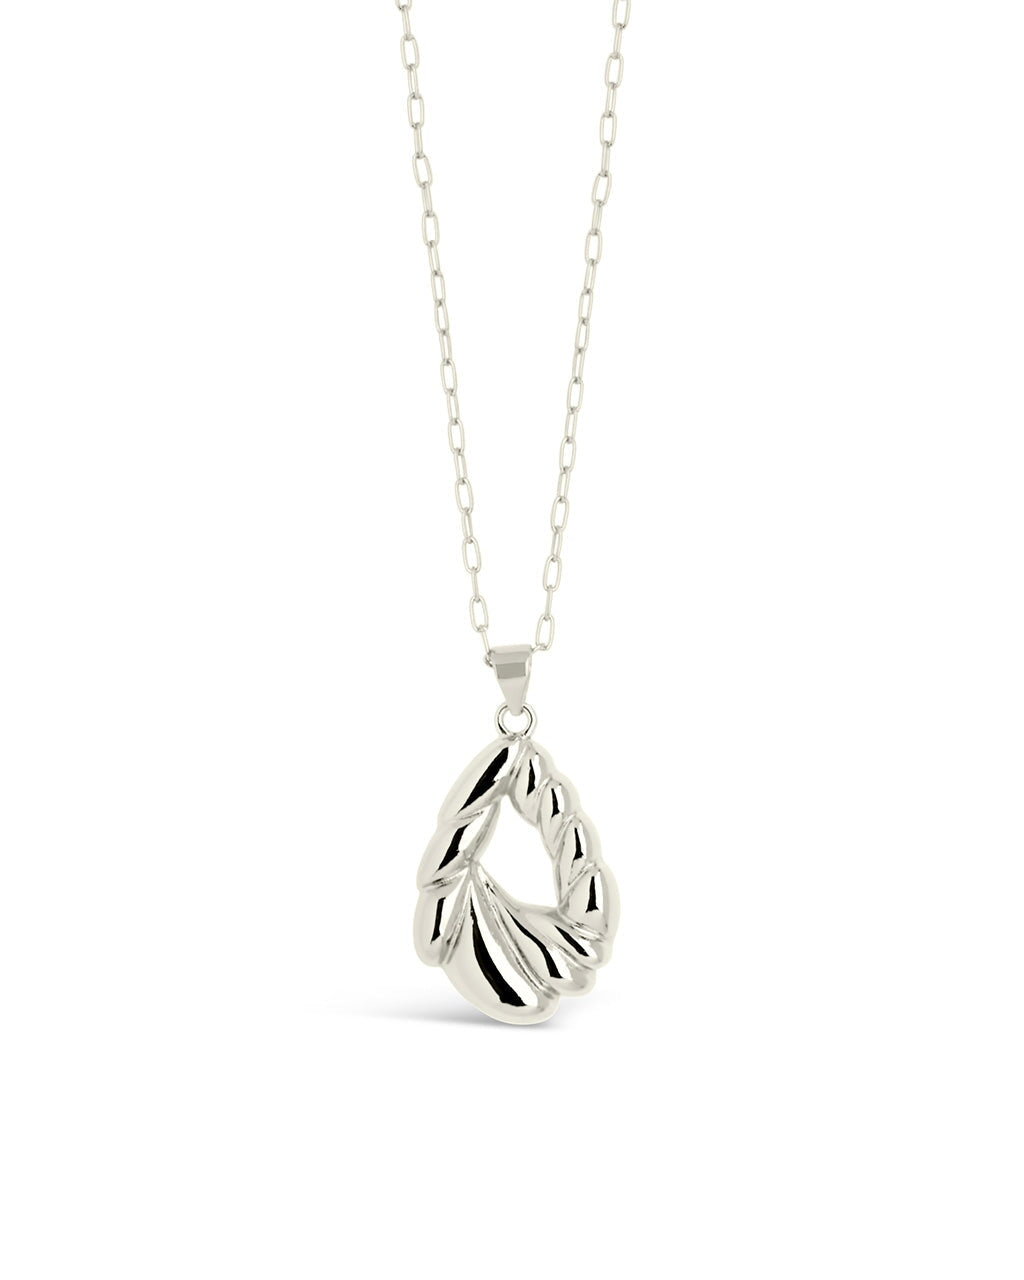 Alouette Pendant Necklace Sterling Forever Silver 